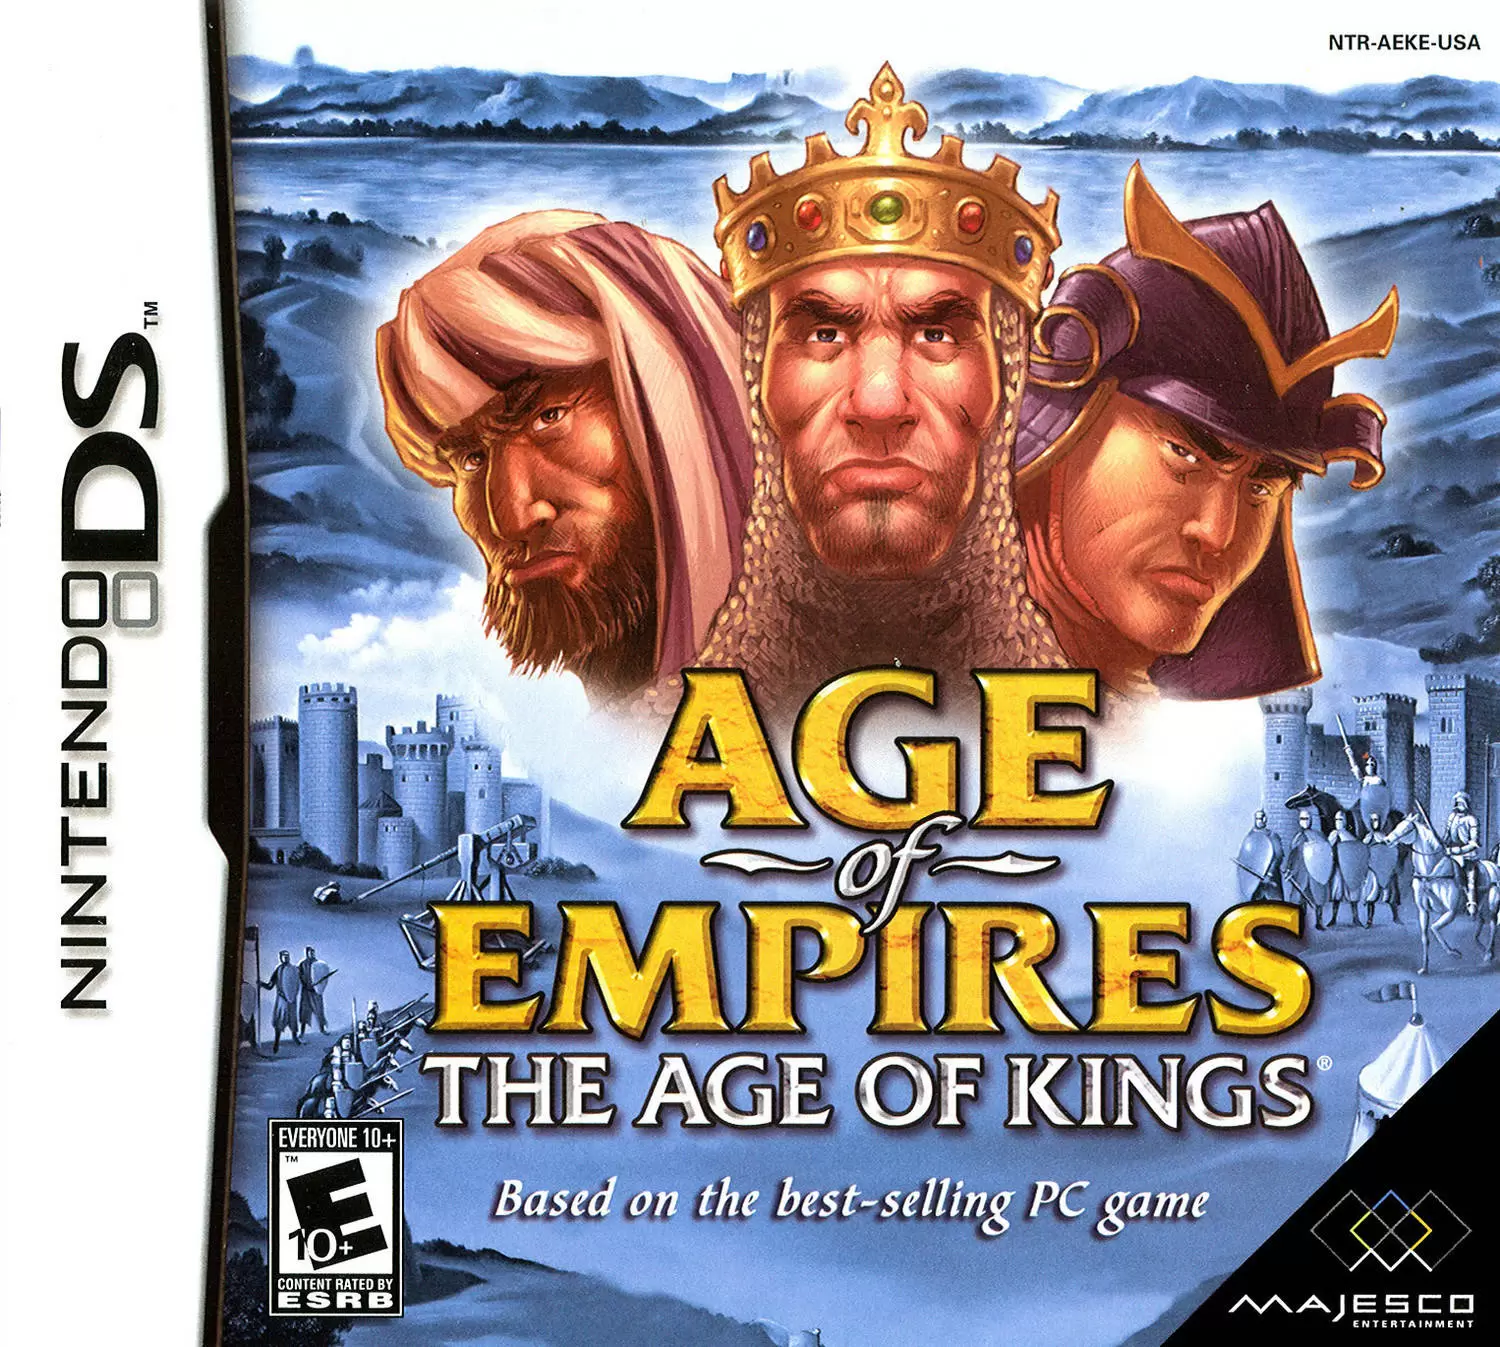 Nintendo DS Games - Age of Empires II: The Age of Kings